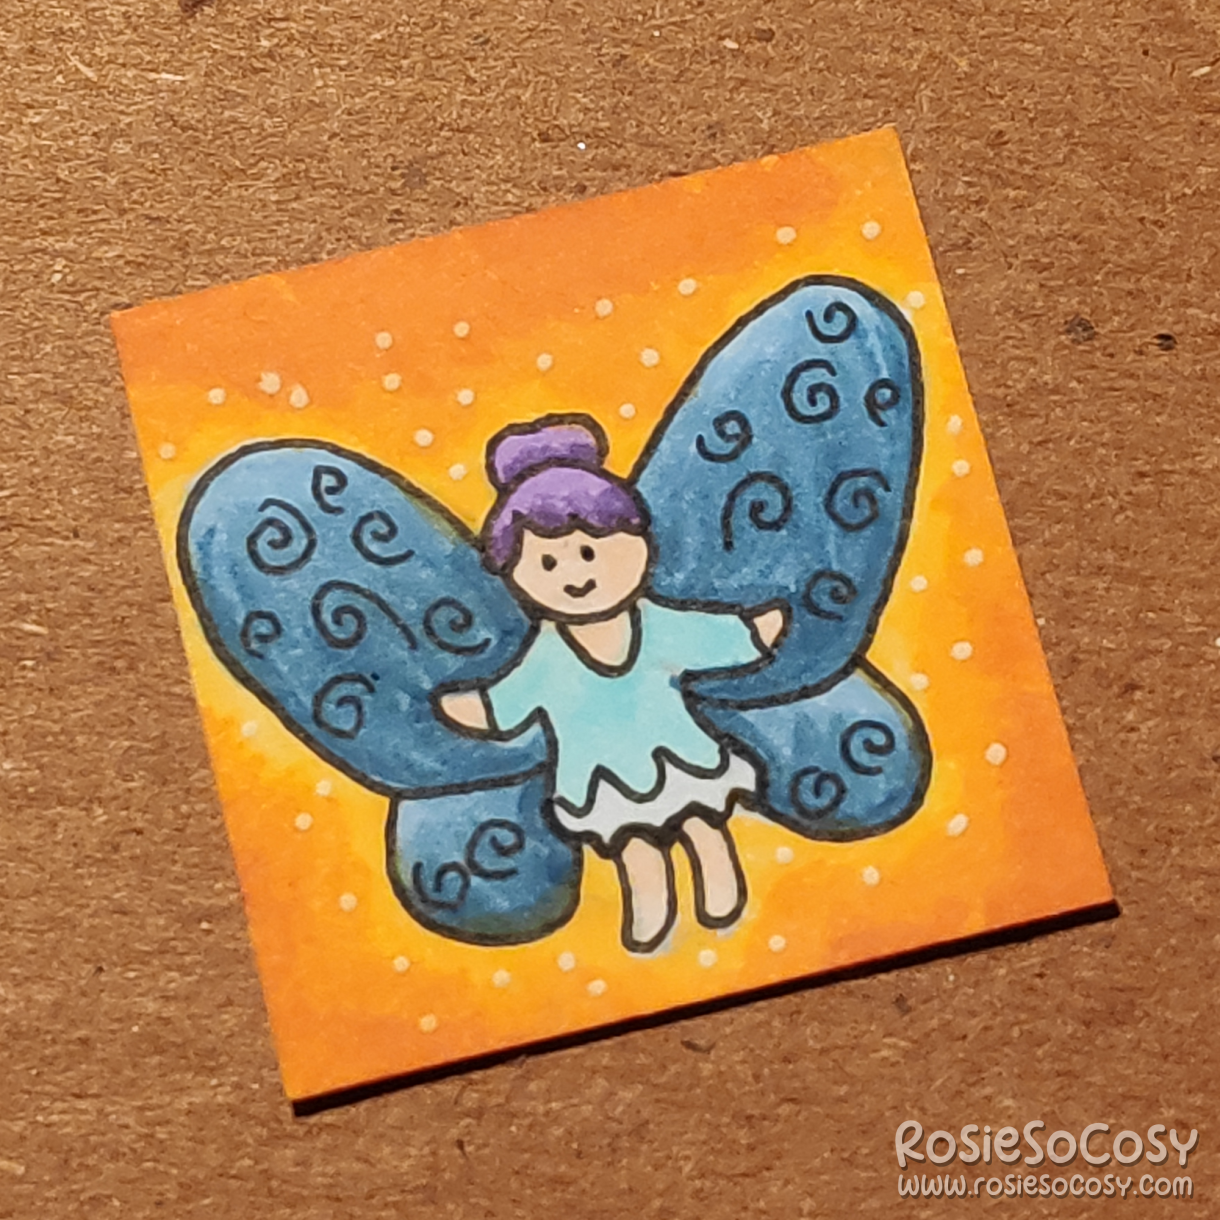 An inch sized drawing of a fairy with blue wings. She has a purple updo, a pastel blue tunic and a fair skintone. The background is orange and yellow with white glittery sparkles.